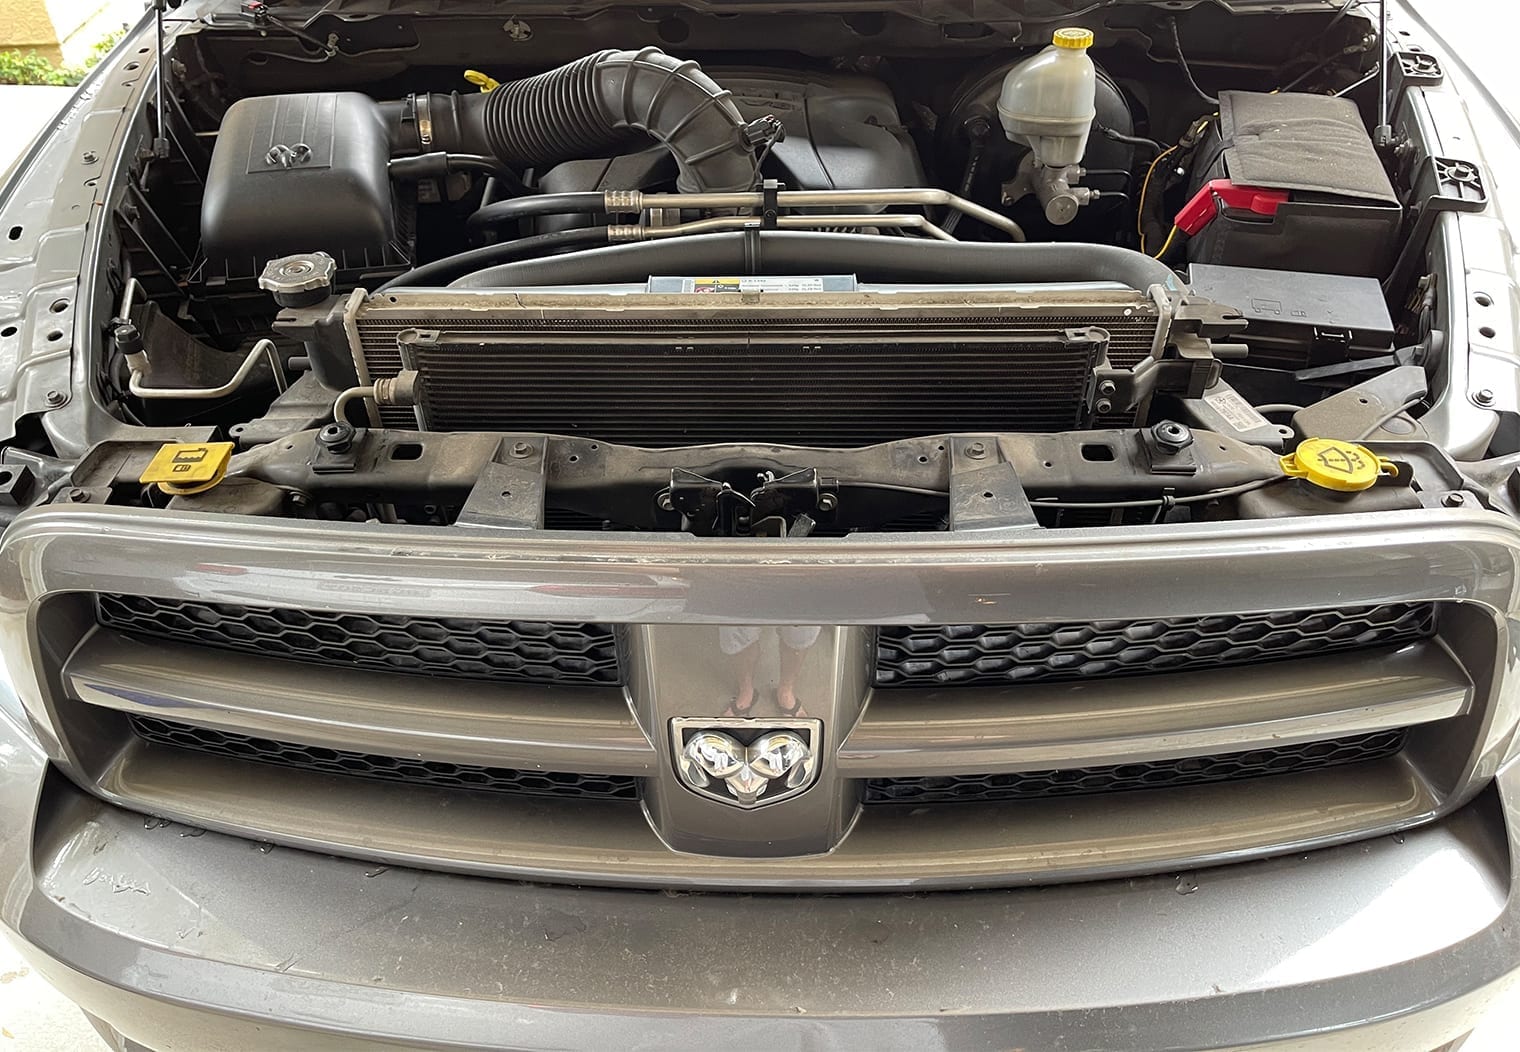 Image of the 2012 ram 1500 engine bay with the trim cover removed to get access to the grill bolts before removing headlights